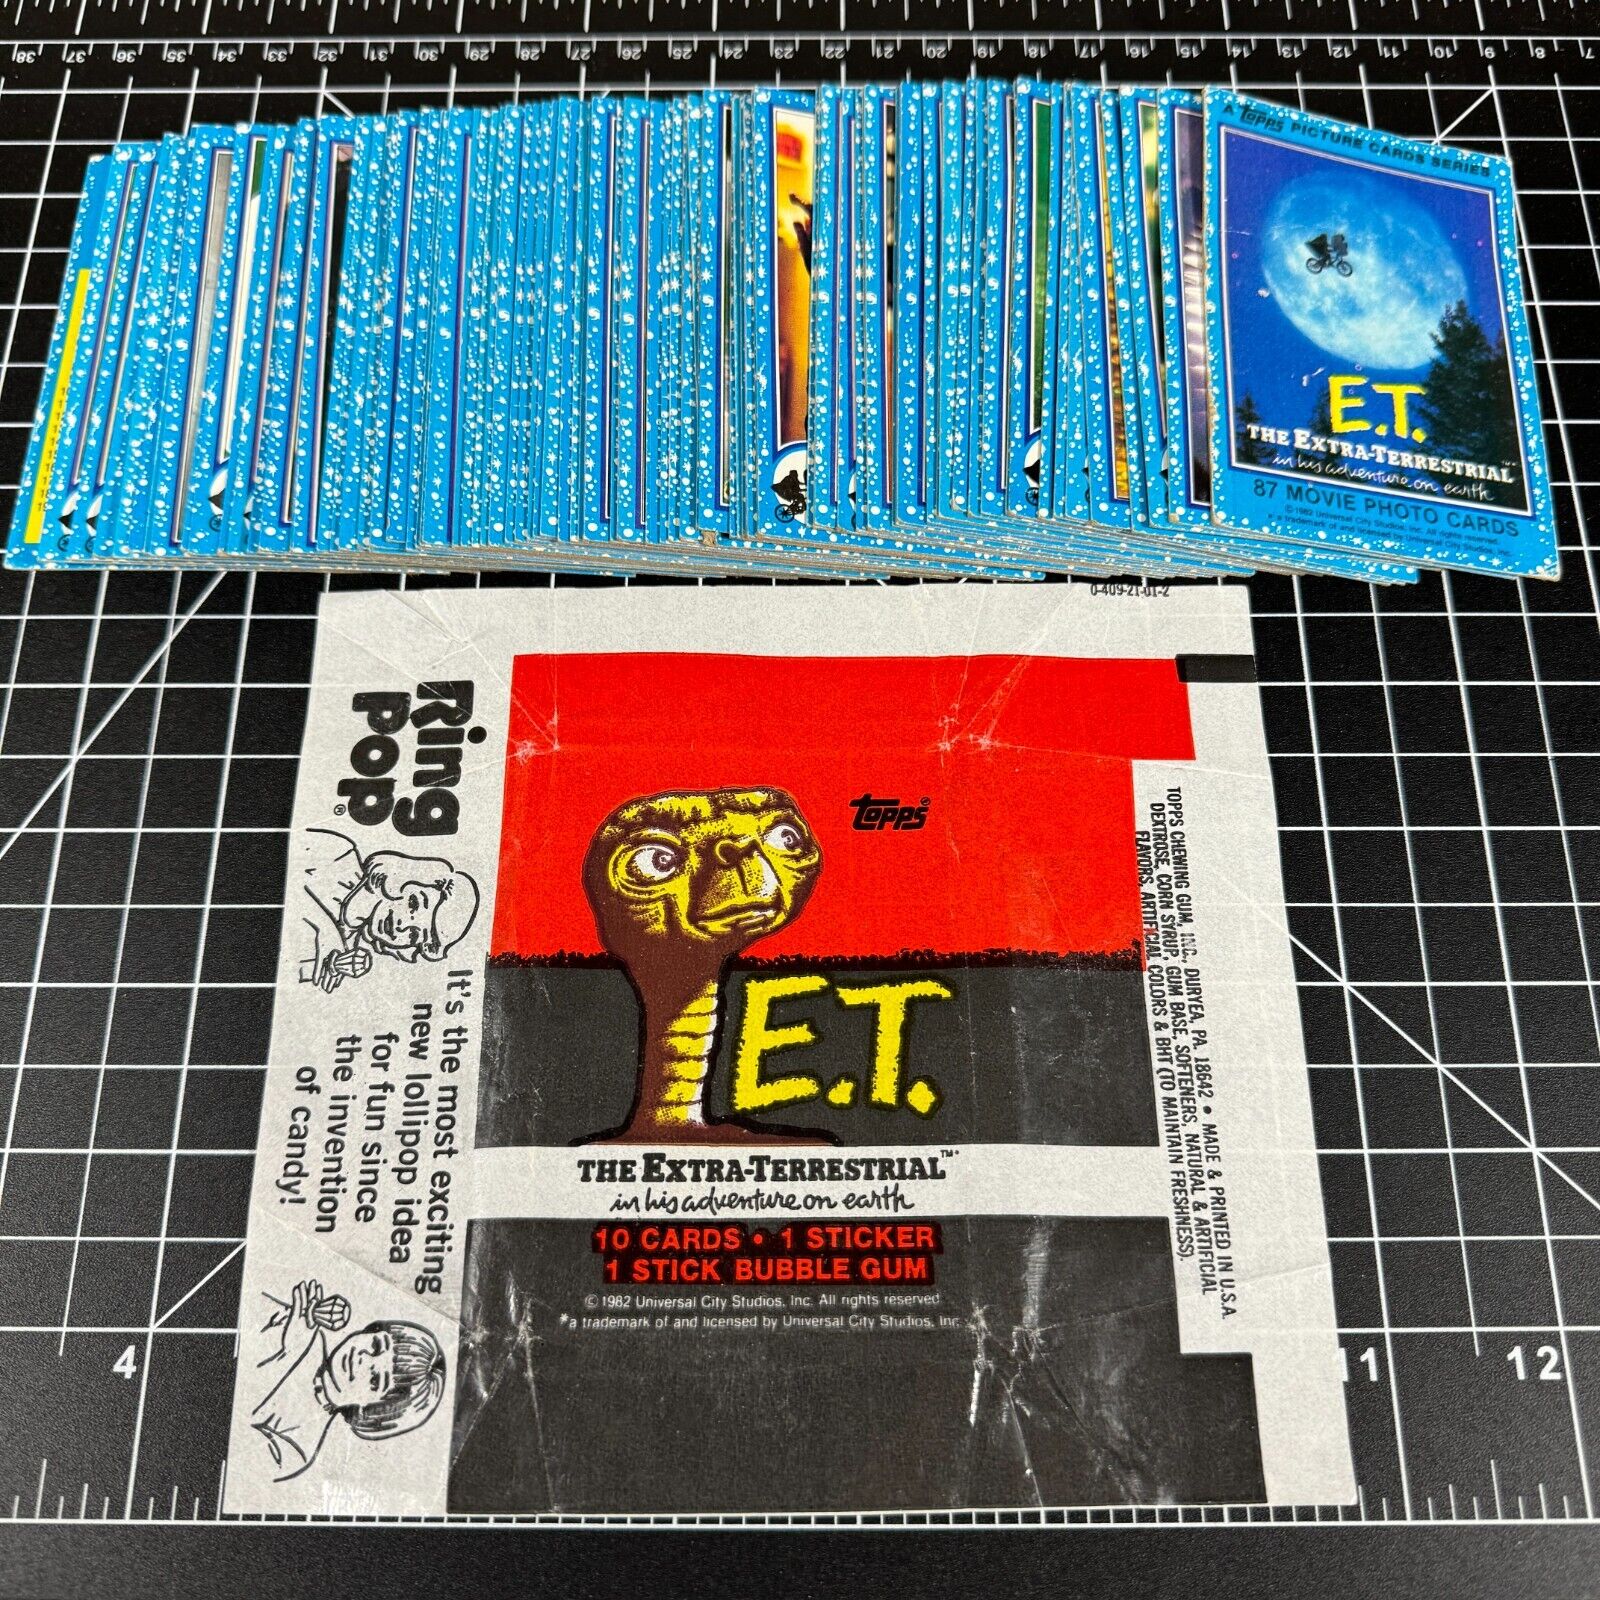 TOPPS 1982 E.T. EXTRA-TERRESTRIAL COMPLETE 87-TRADING CARD SET+WRAPPER GOOD-COND